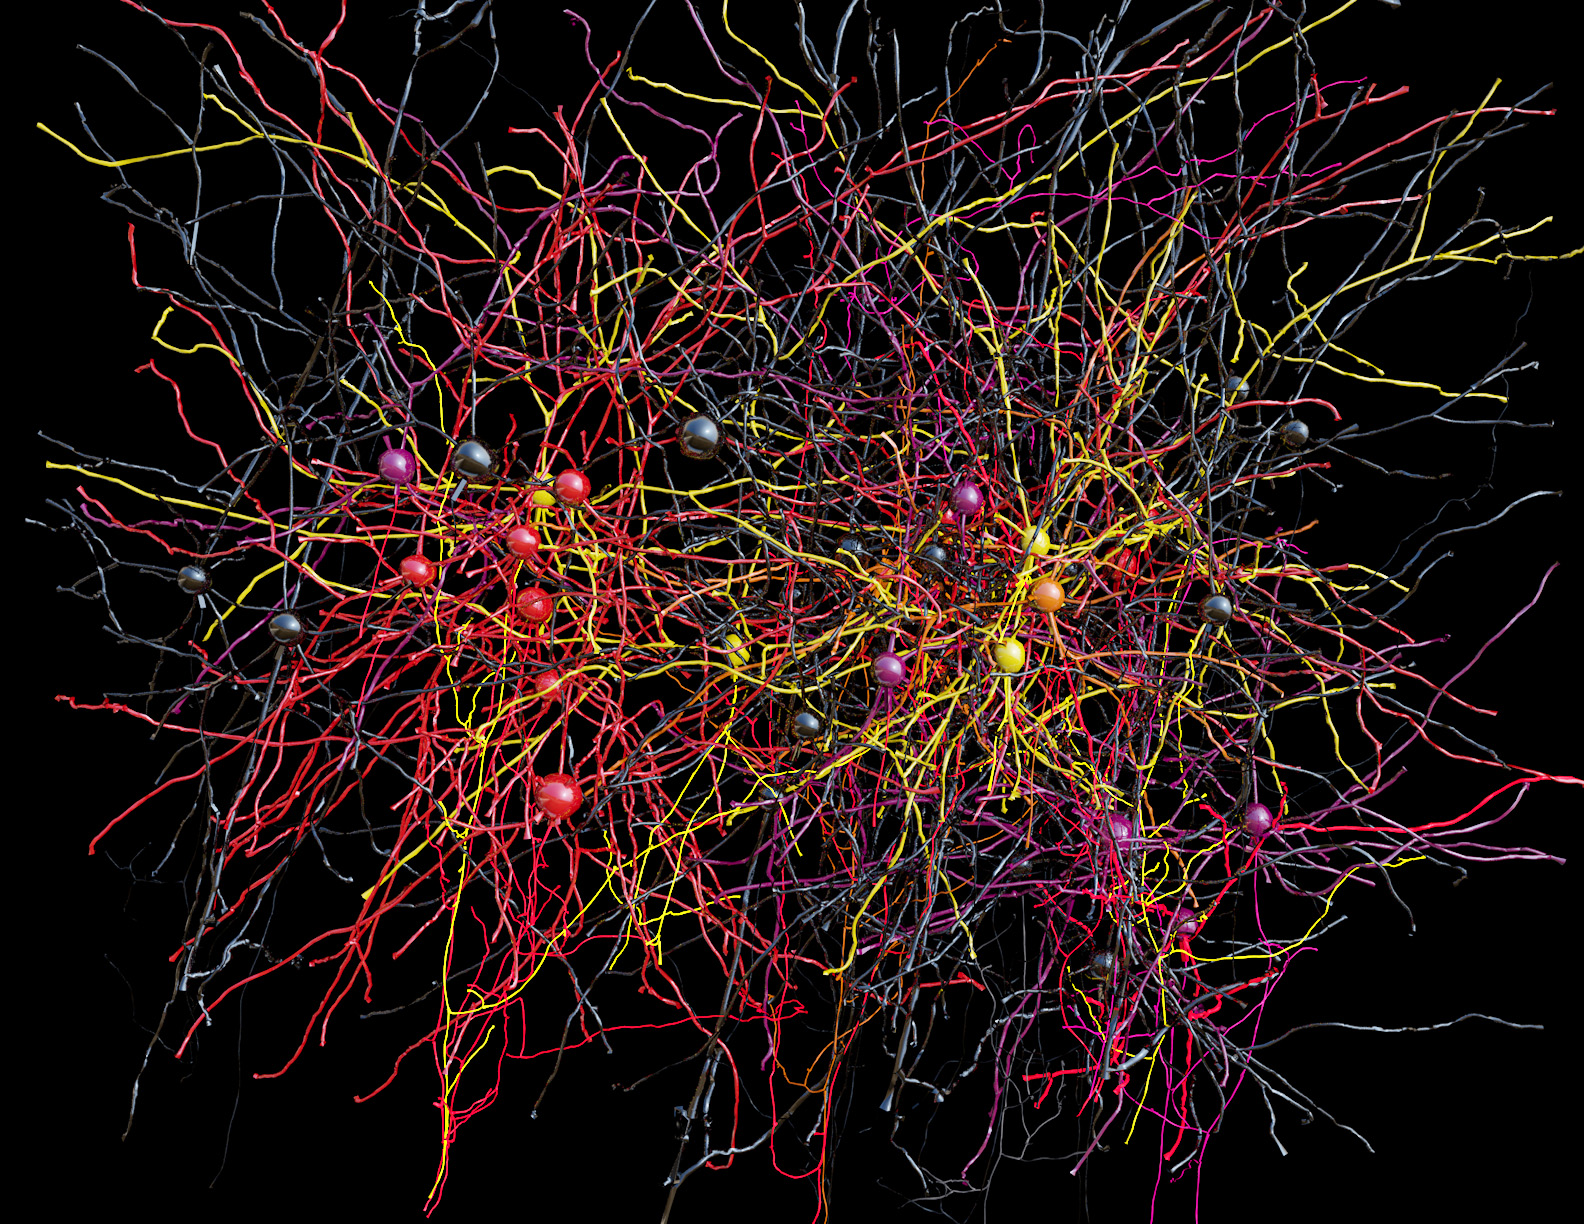 A network of cortical neurons whose connections were traced from a multi-terabyte 3D data set. The data were created by an electron microscope designed and built at Harvard Medical School to collect millions of images in nanoscopic detail, so that every one of the “wires” could be seen, along with the connections between them. Some of the neurons are color-coded according to their activity patterns in the living brain. This is the newest example of functional connectomics, which combines high-throughput functional imaging, at single-cell resolution, with terascale anatomy of the very same neurons. (Image credit: Clay Reid, Allen Institute; Wei-Chung Lee, Harvard Medical School; Sam Ingersoll, graphic artist)